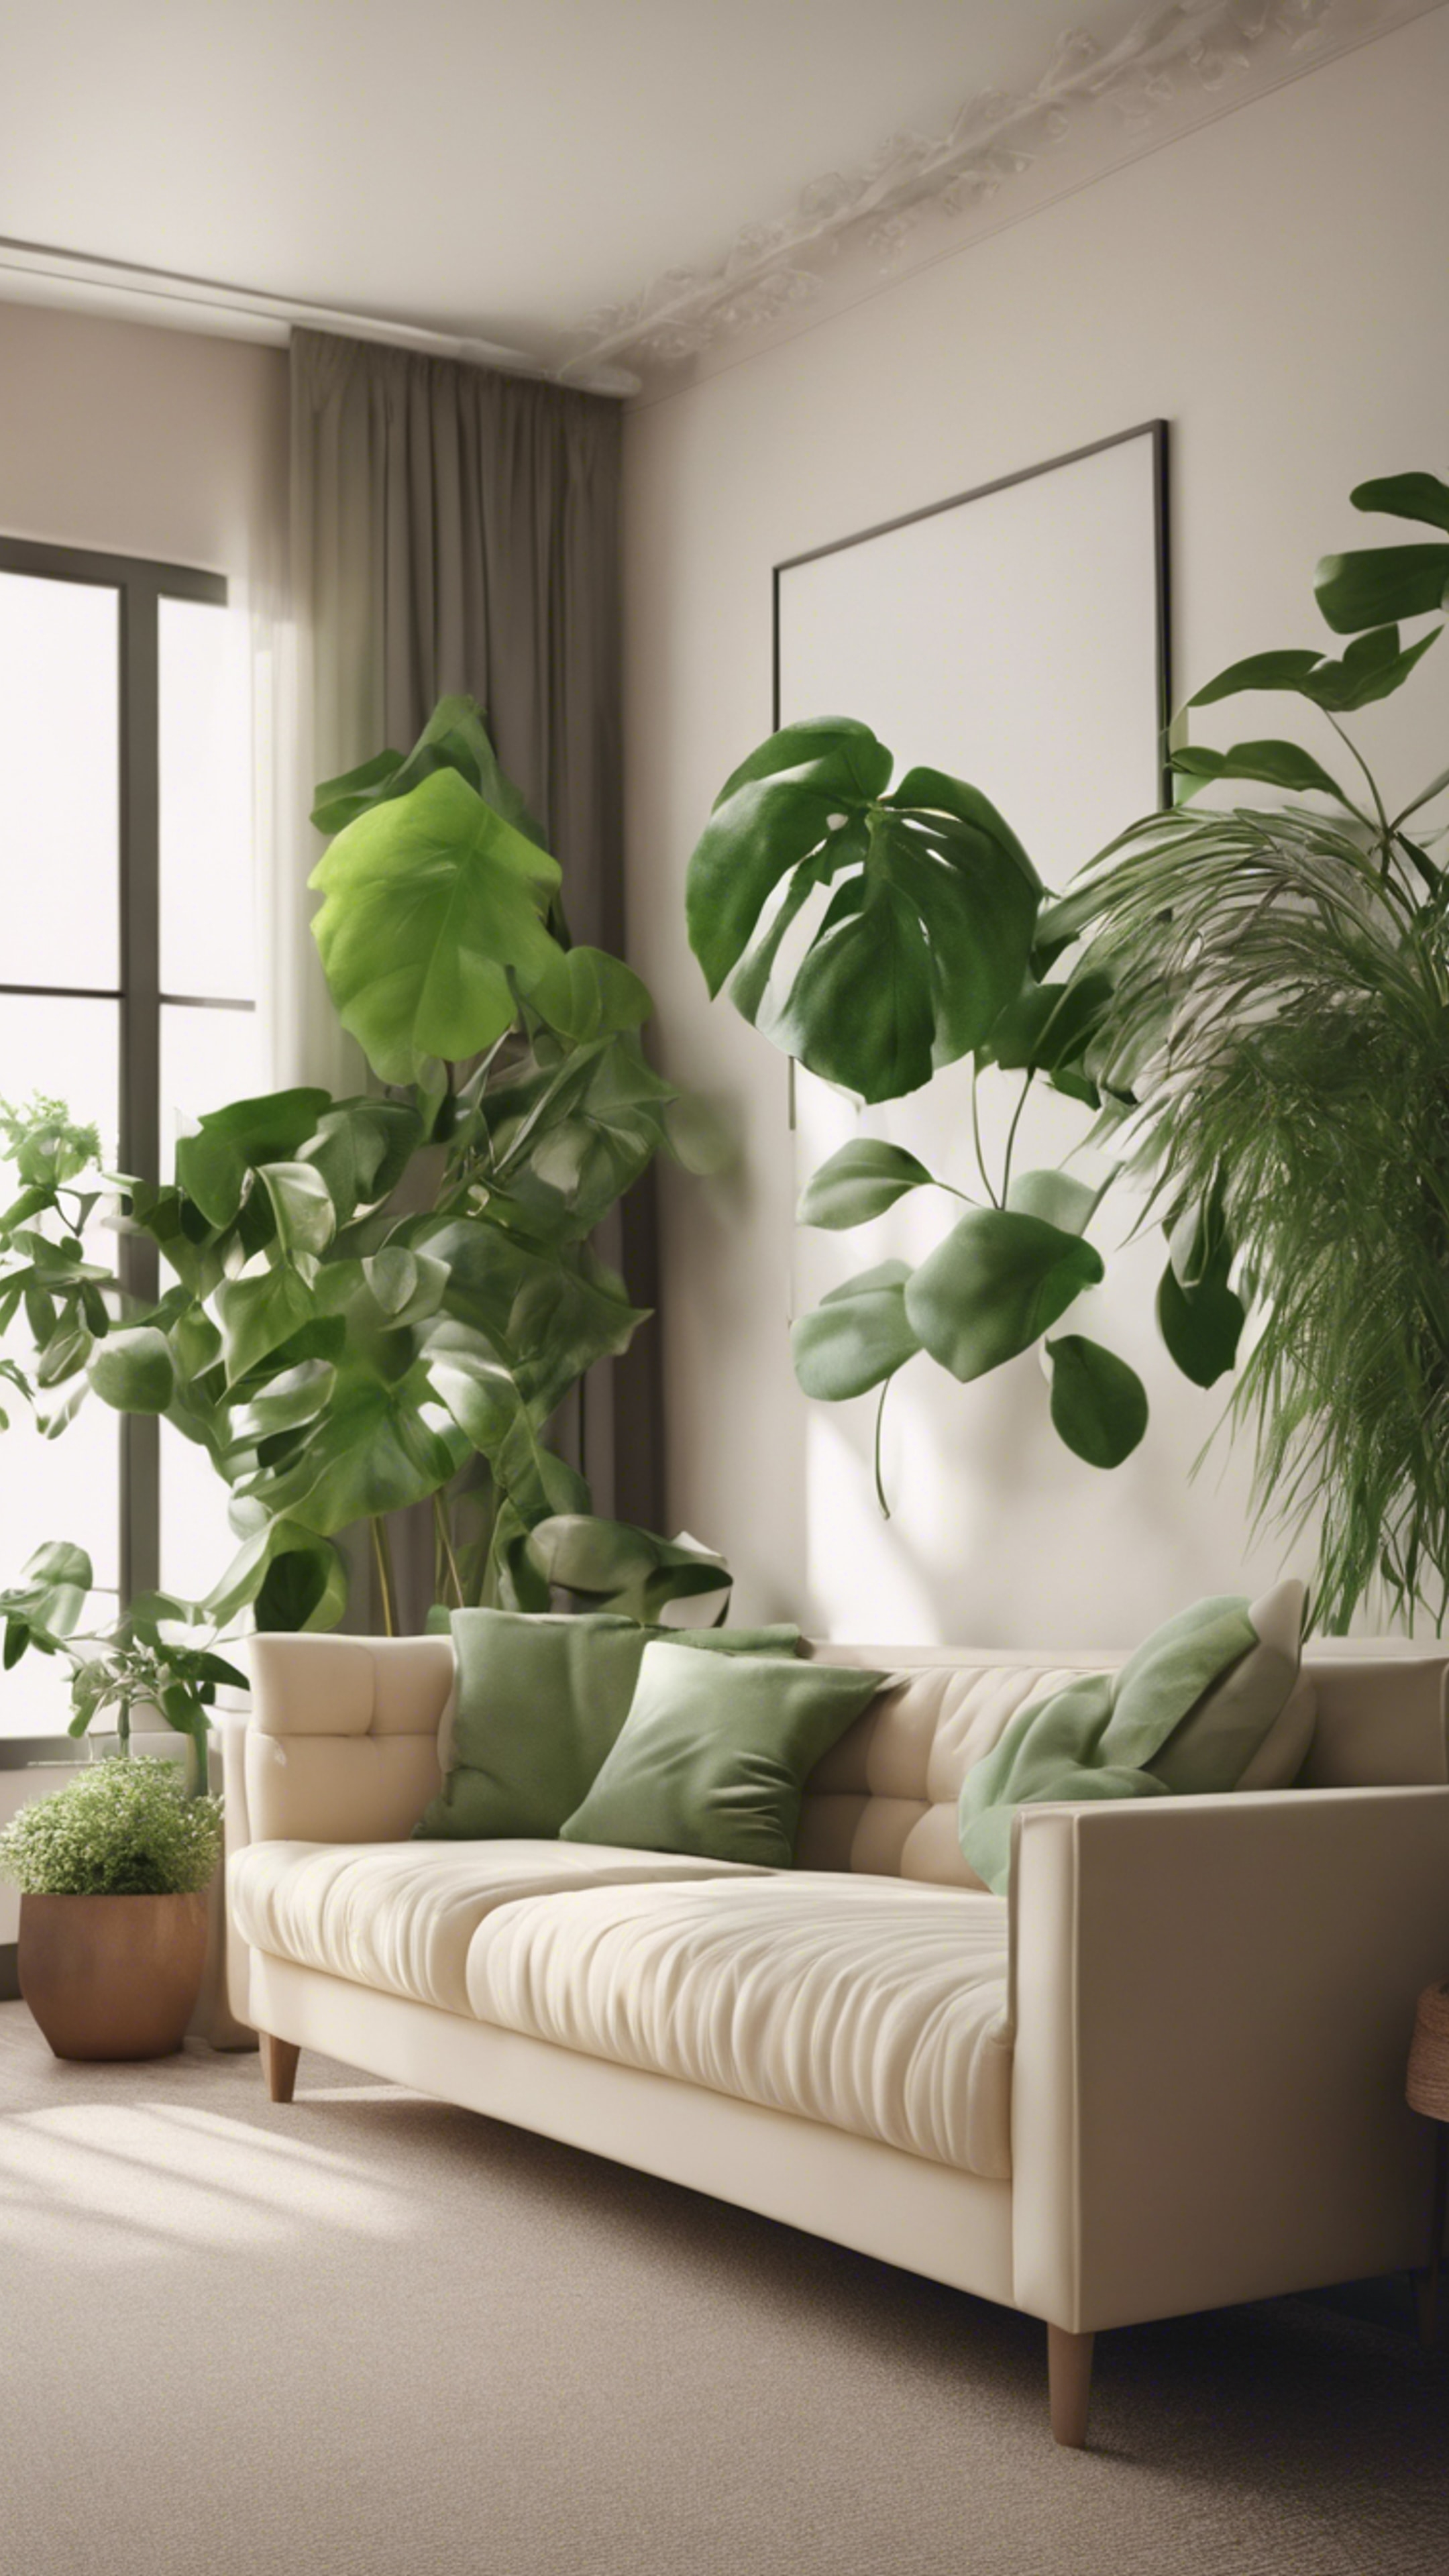 A simplistic living room featuring a cream couch contrasted with a natural green aesthetic of indoor plants Tapeta[57c4f329650745189cc4]